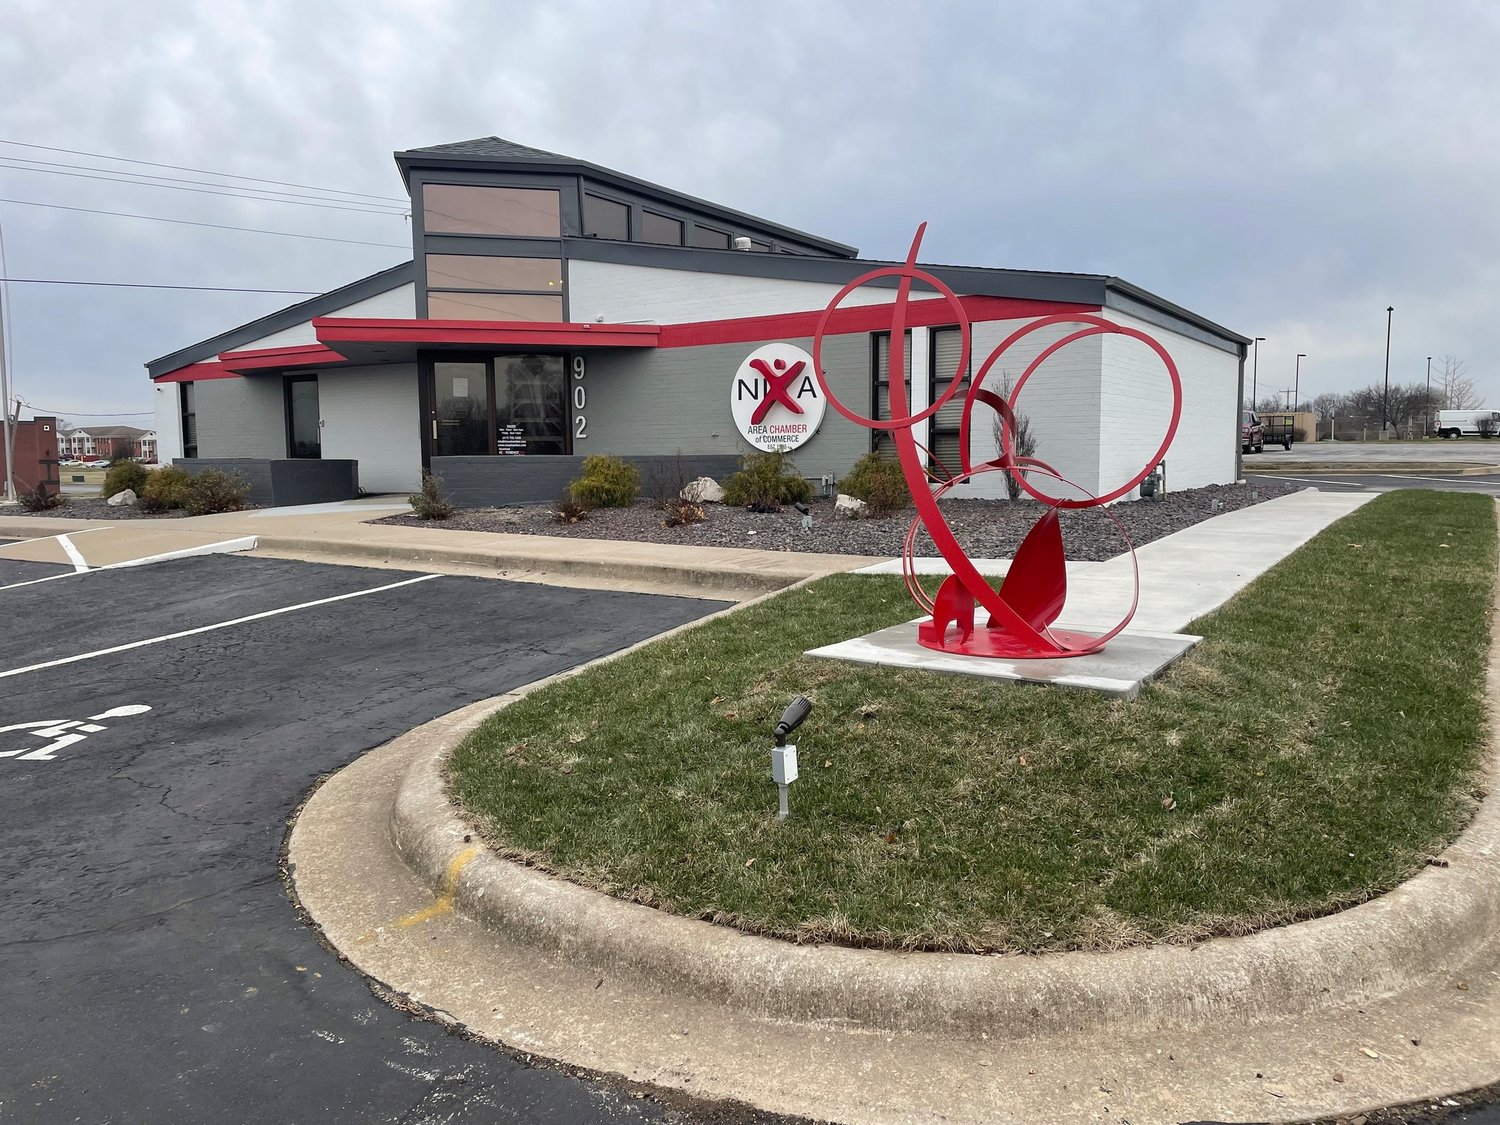 The Nixa chamber recently received final approvals for its new office.